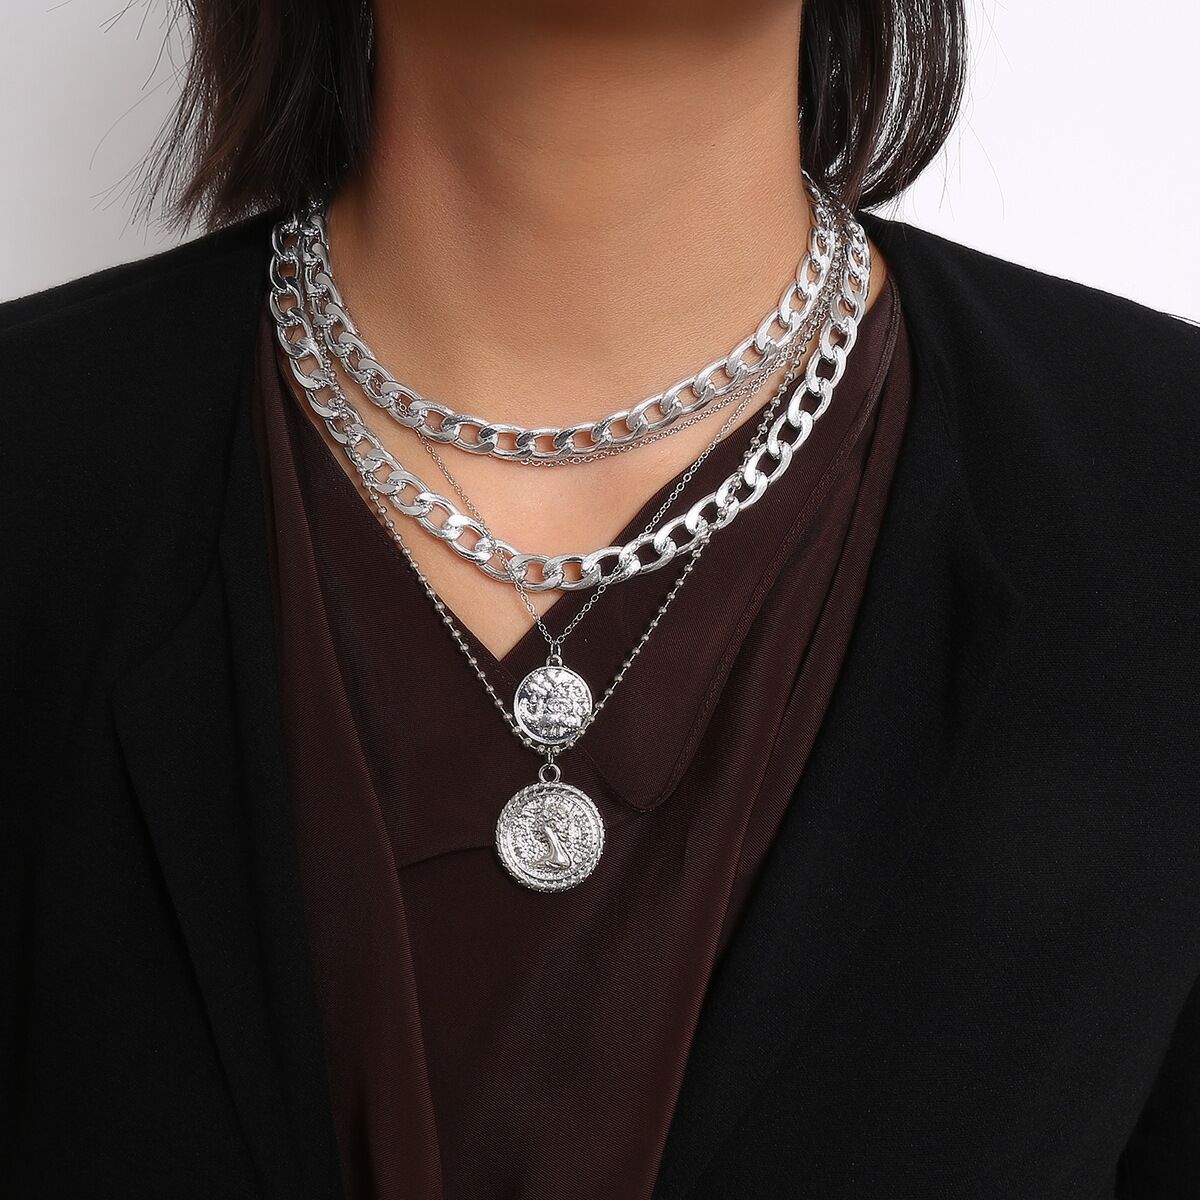 Ladies Fashion Necklaces Layered Medal Pendant Necklaces